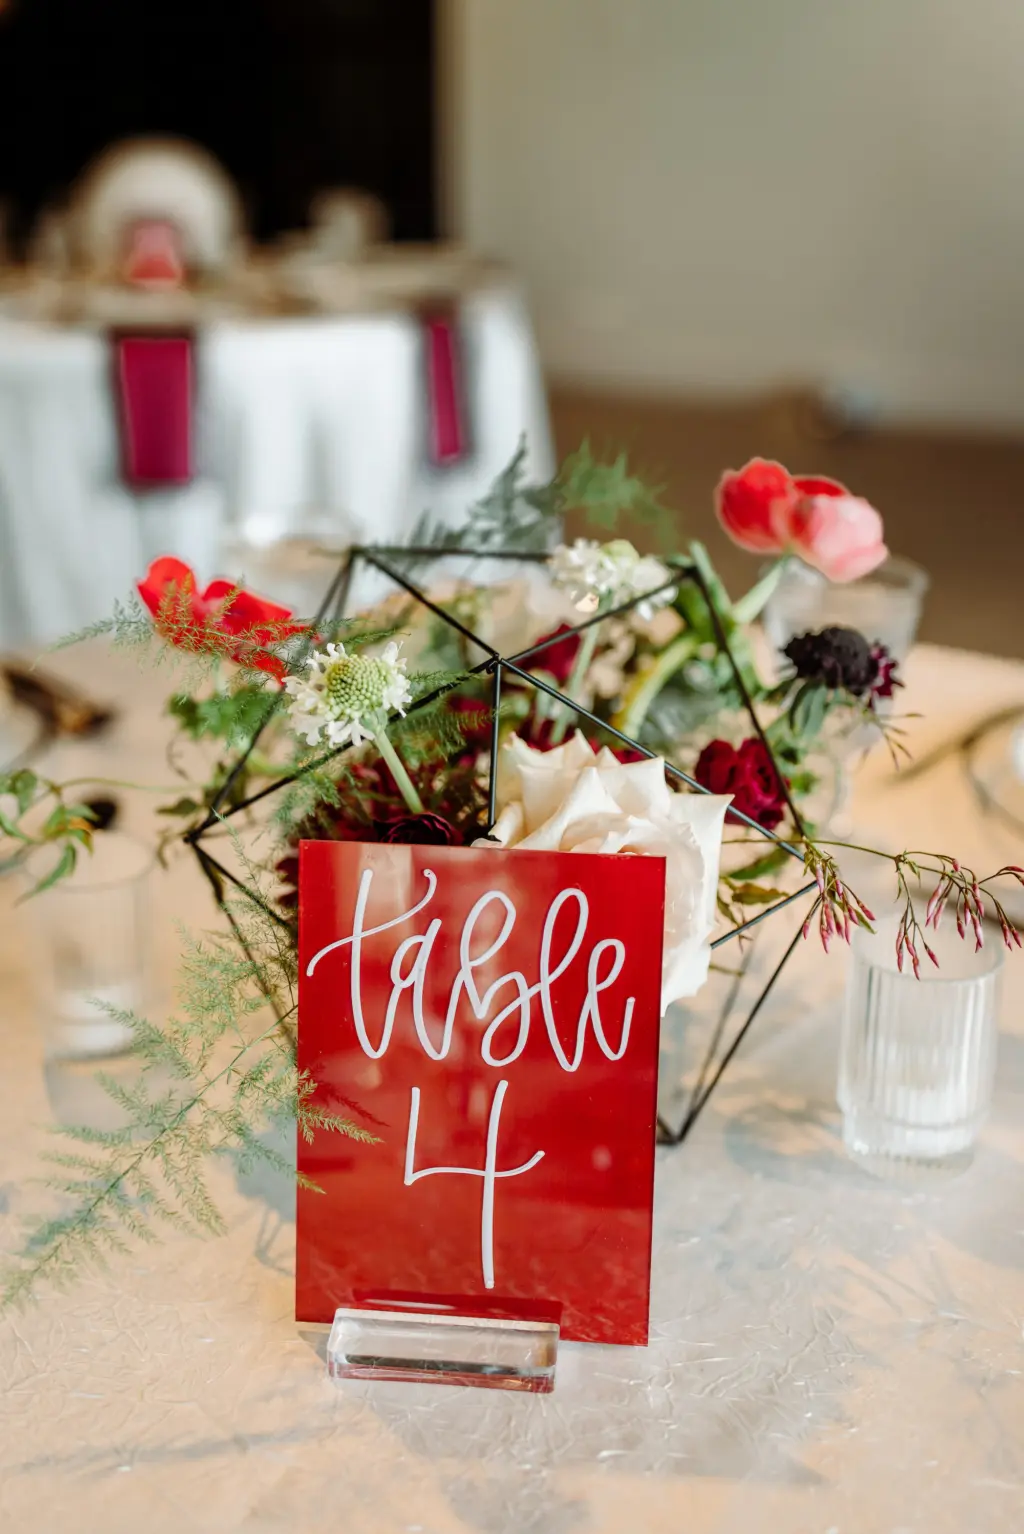 Hand-lettered Table Number Sign Ideas | Black Geometric Centerpiece with Pink Roses, Red Carnations, and Protea | Modern Asian Wedding Reception Inspiration